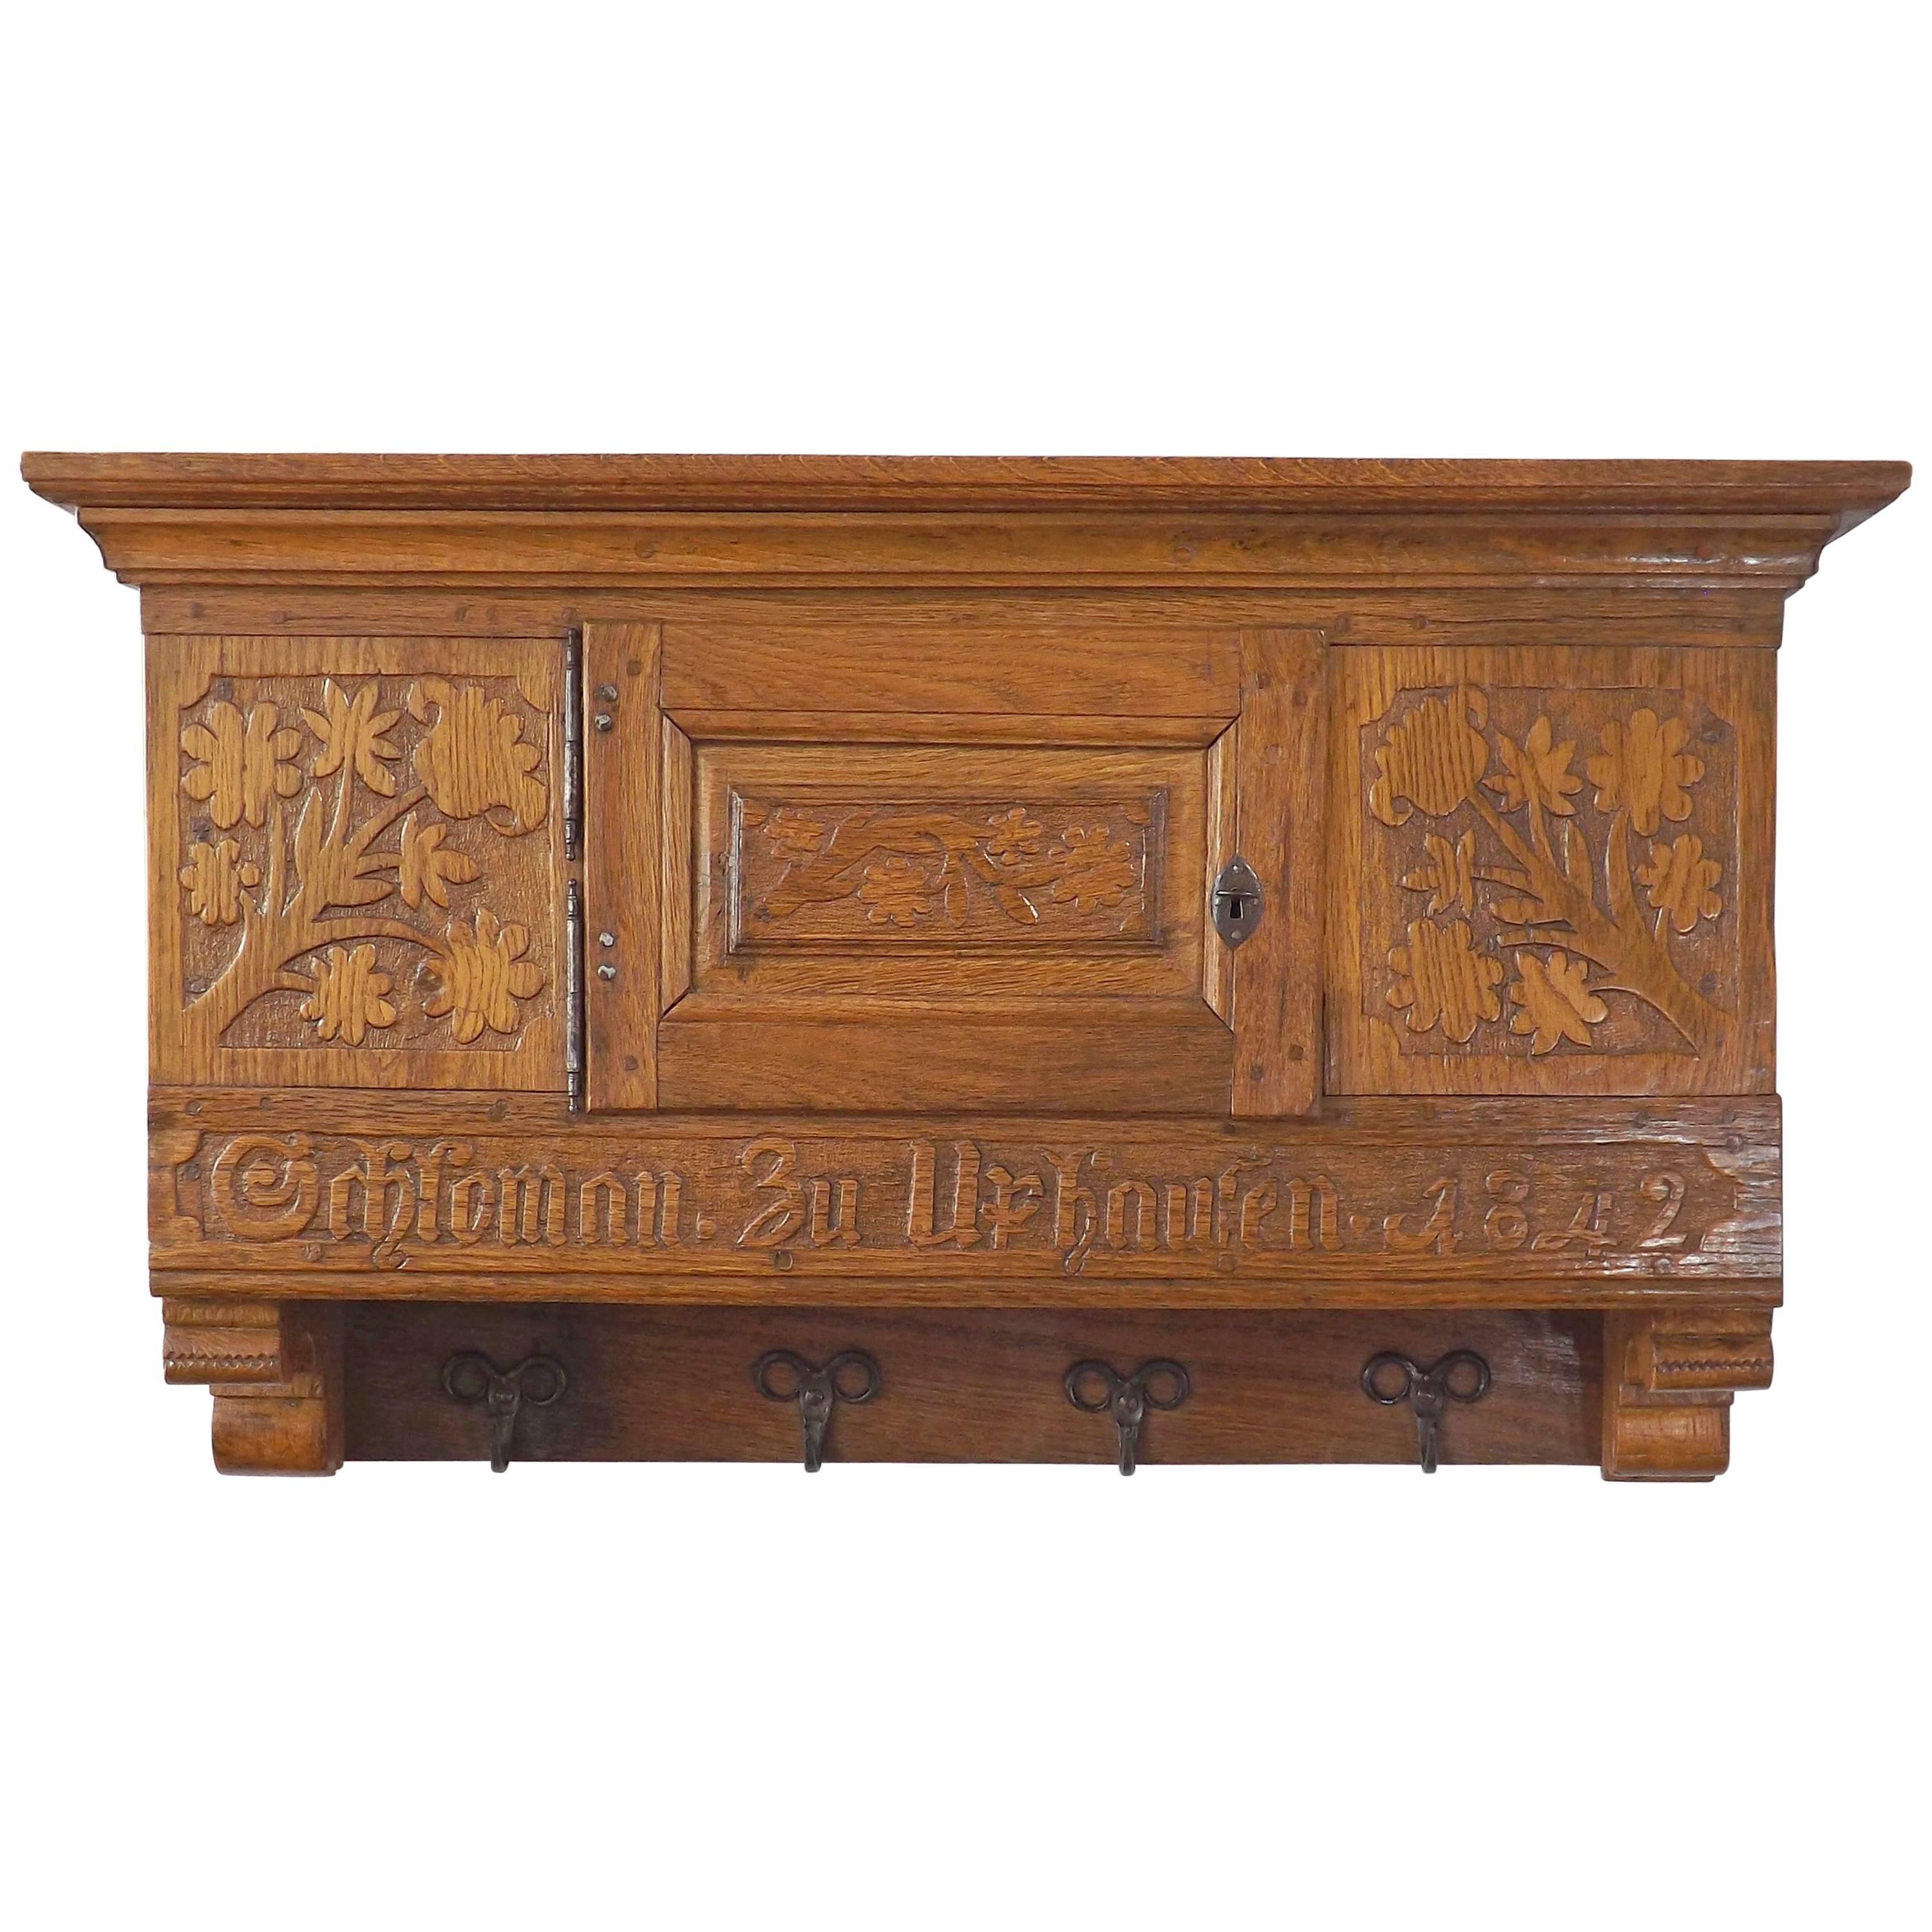 Carved German Coatrack with Wall Storage Dated 1842